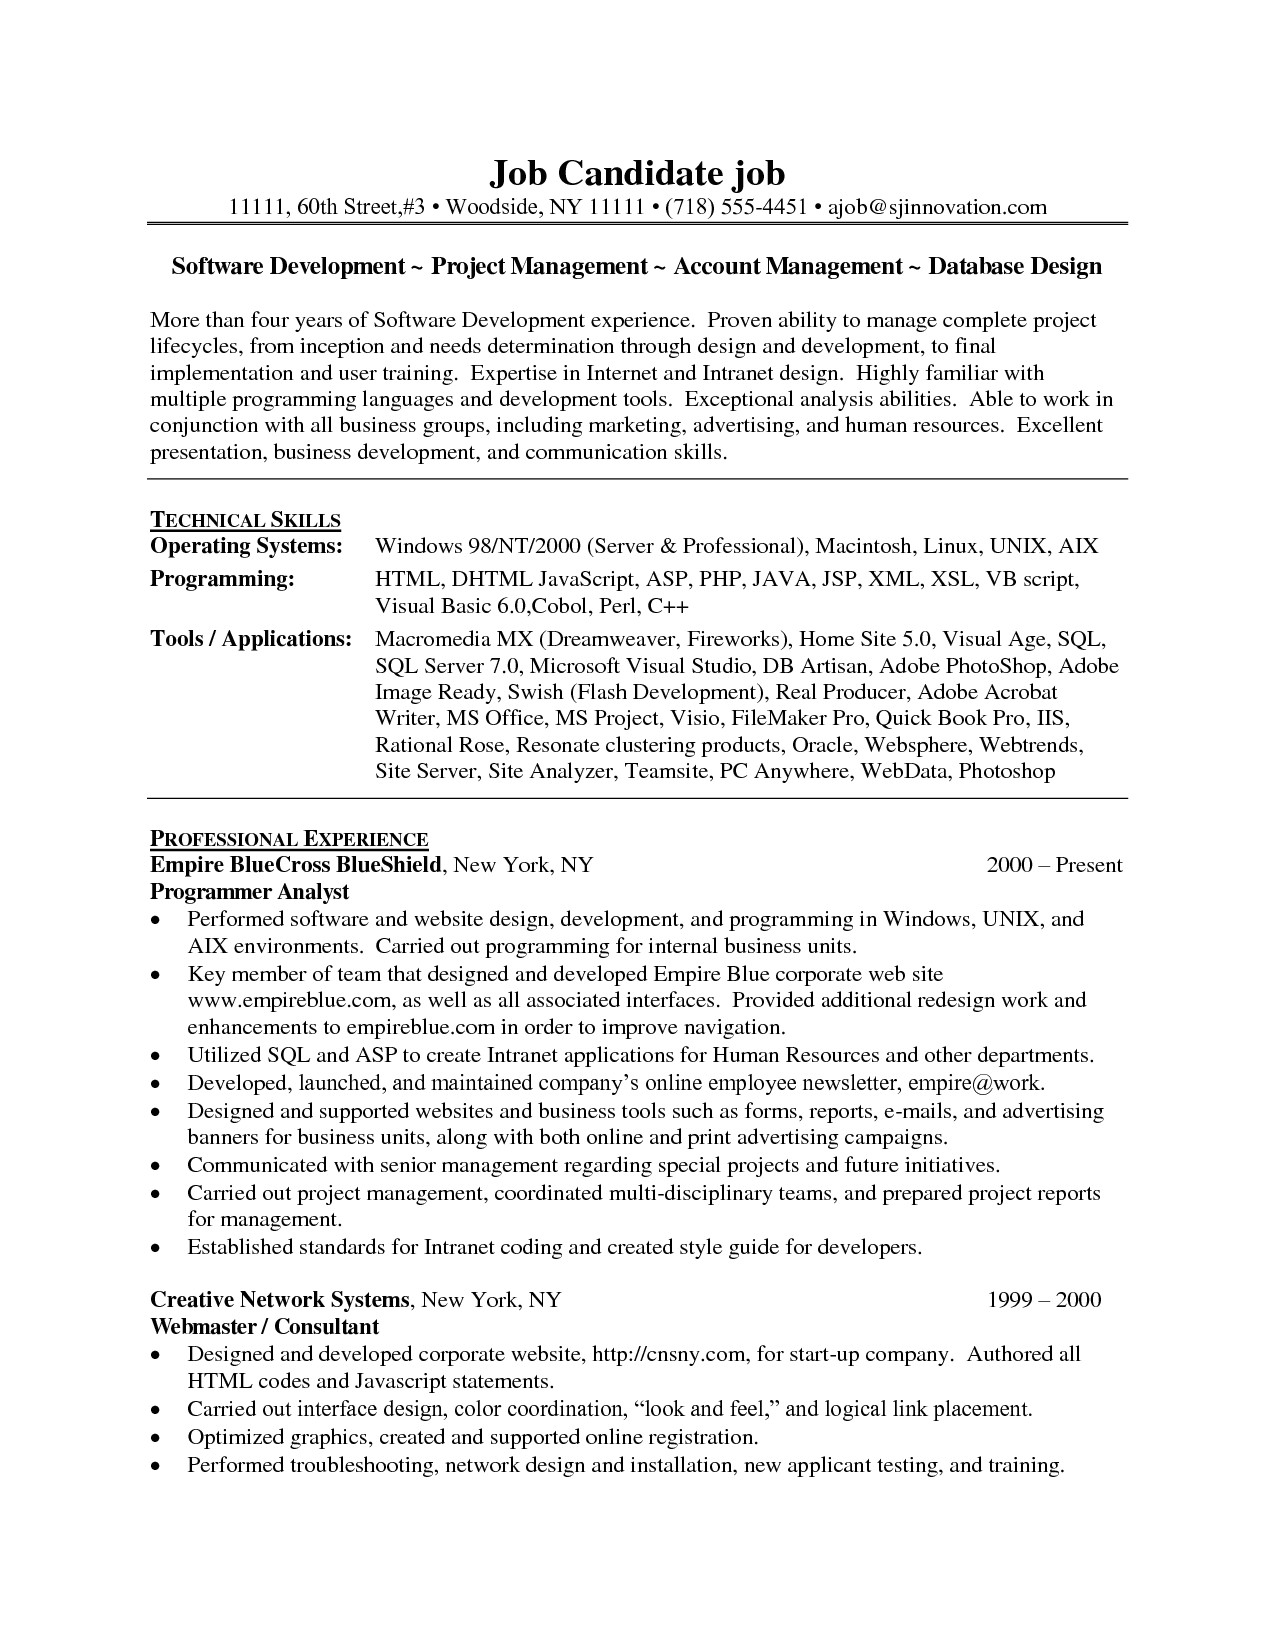 sample resume for software engineer with experience in java